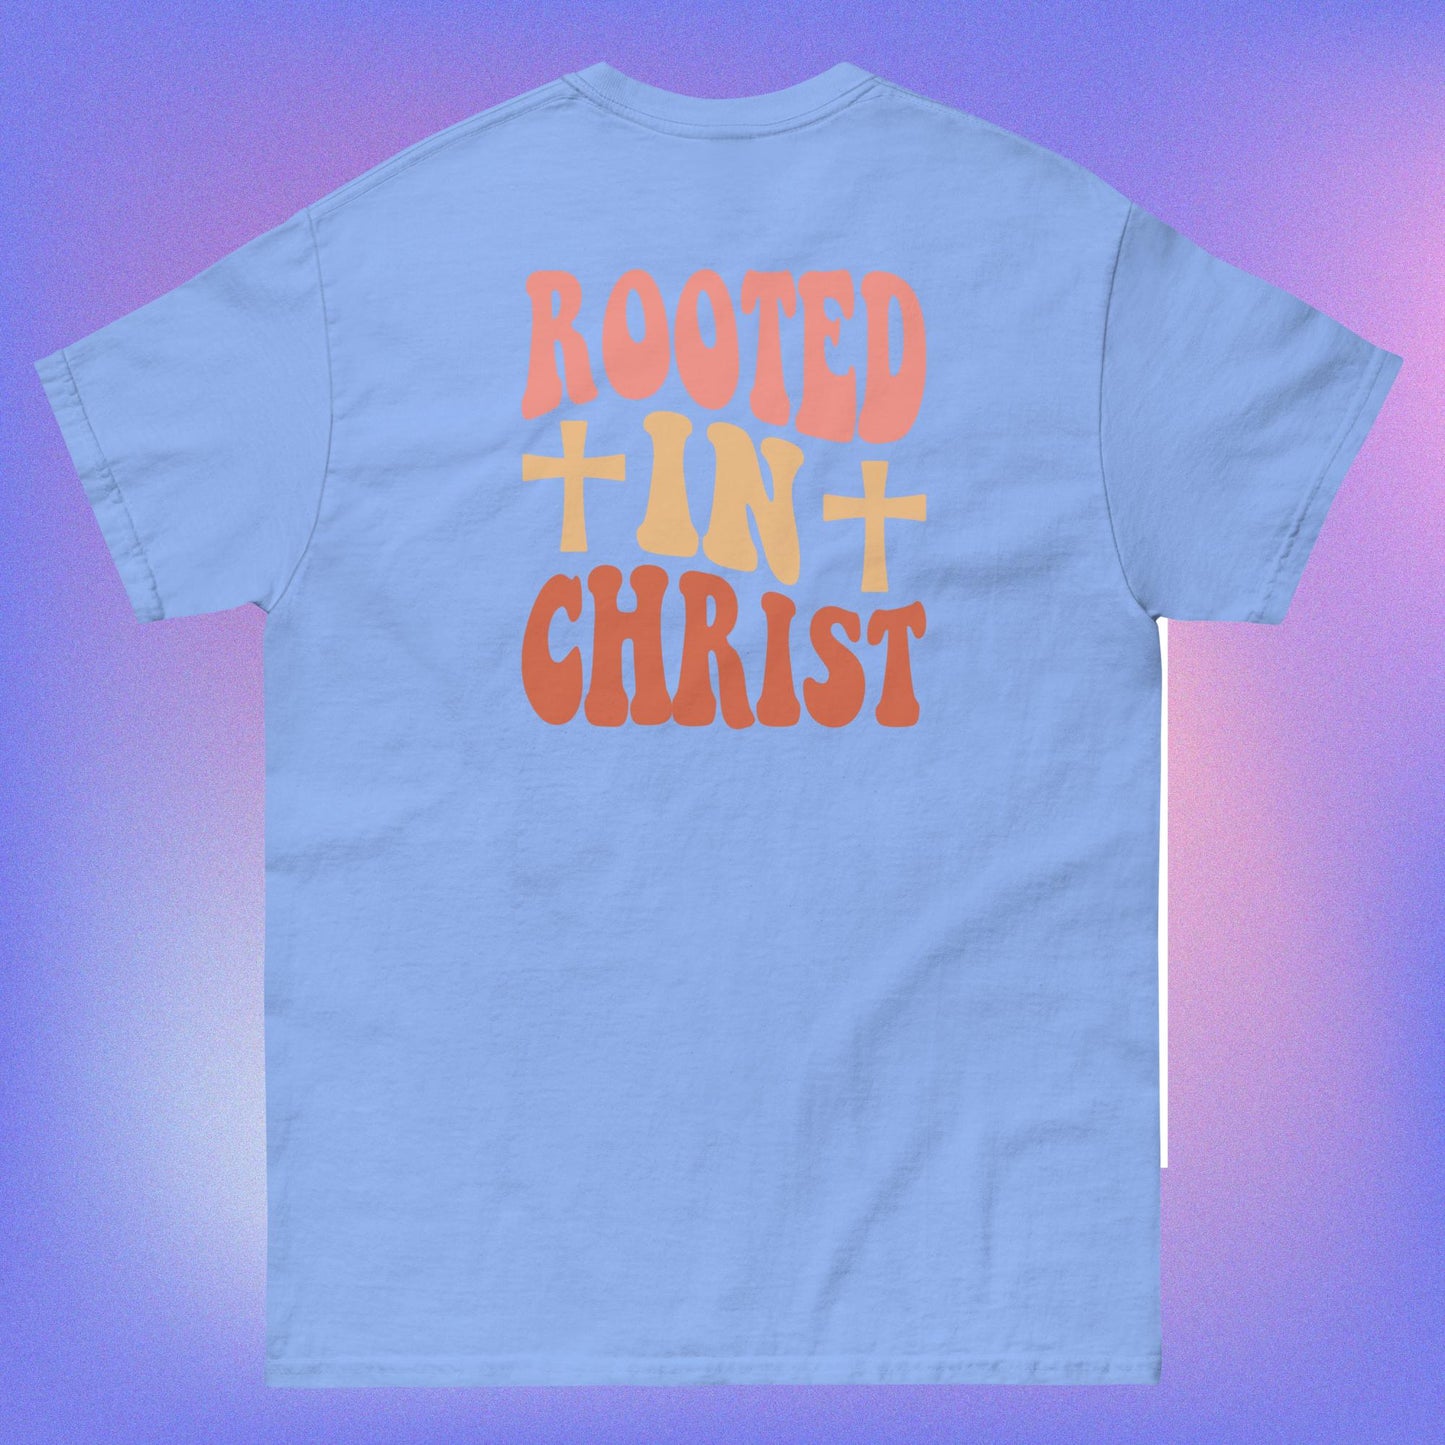 "Rooted in Christ" classic tee